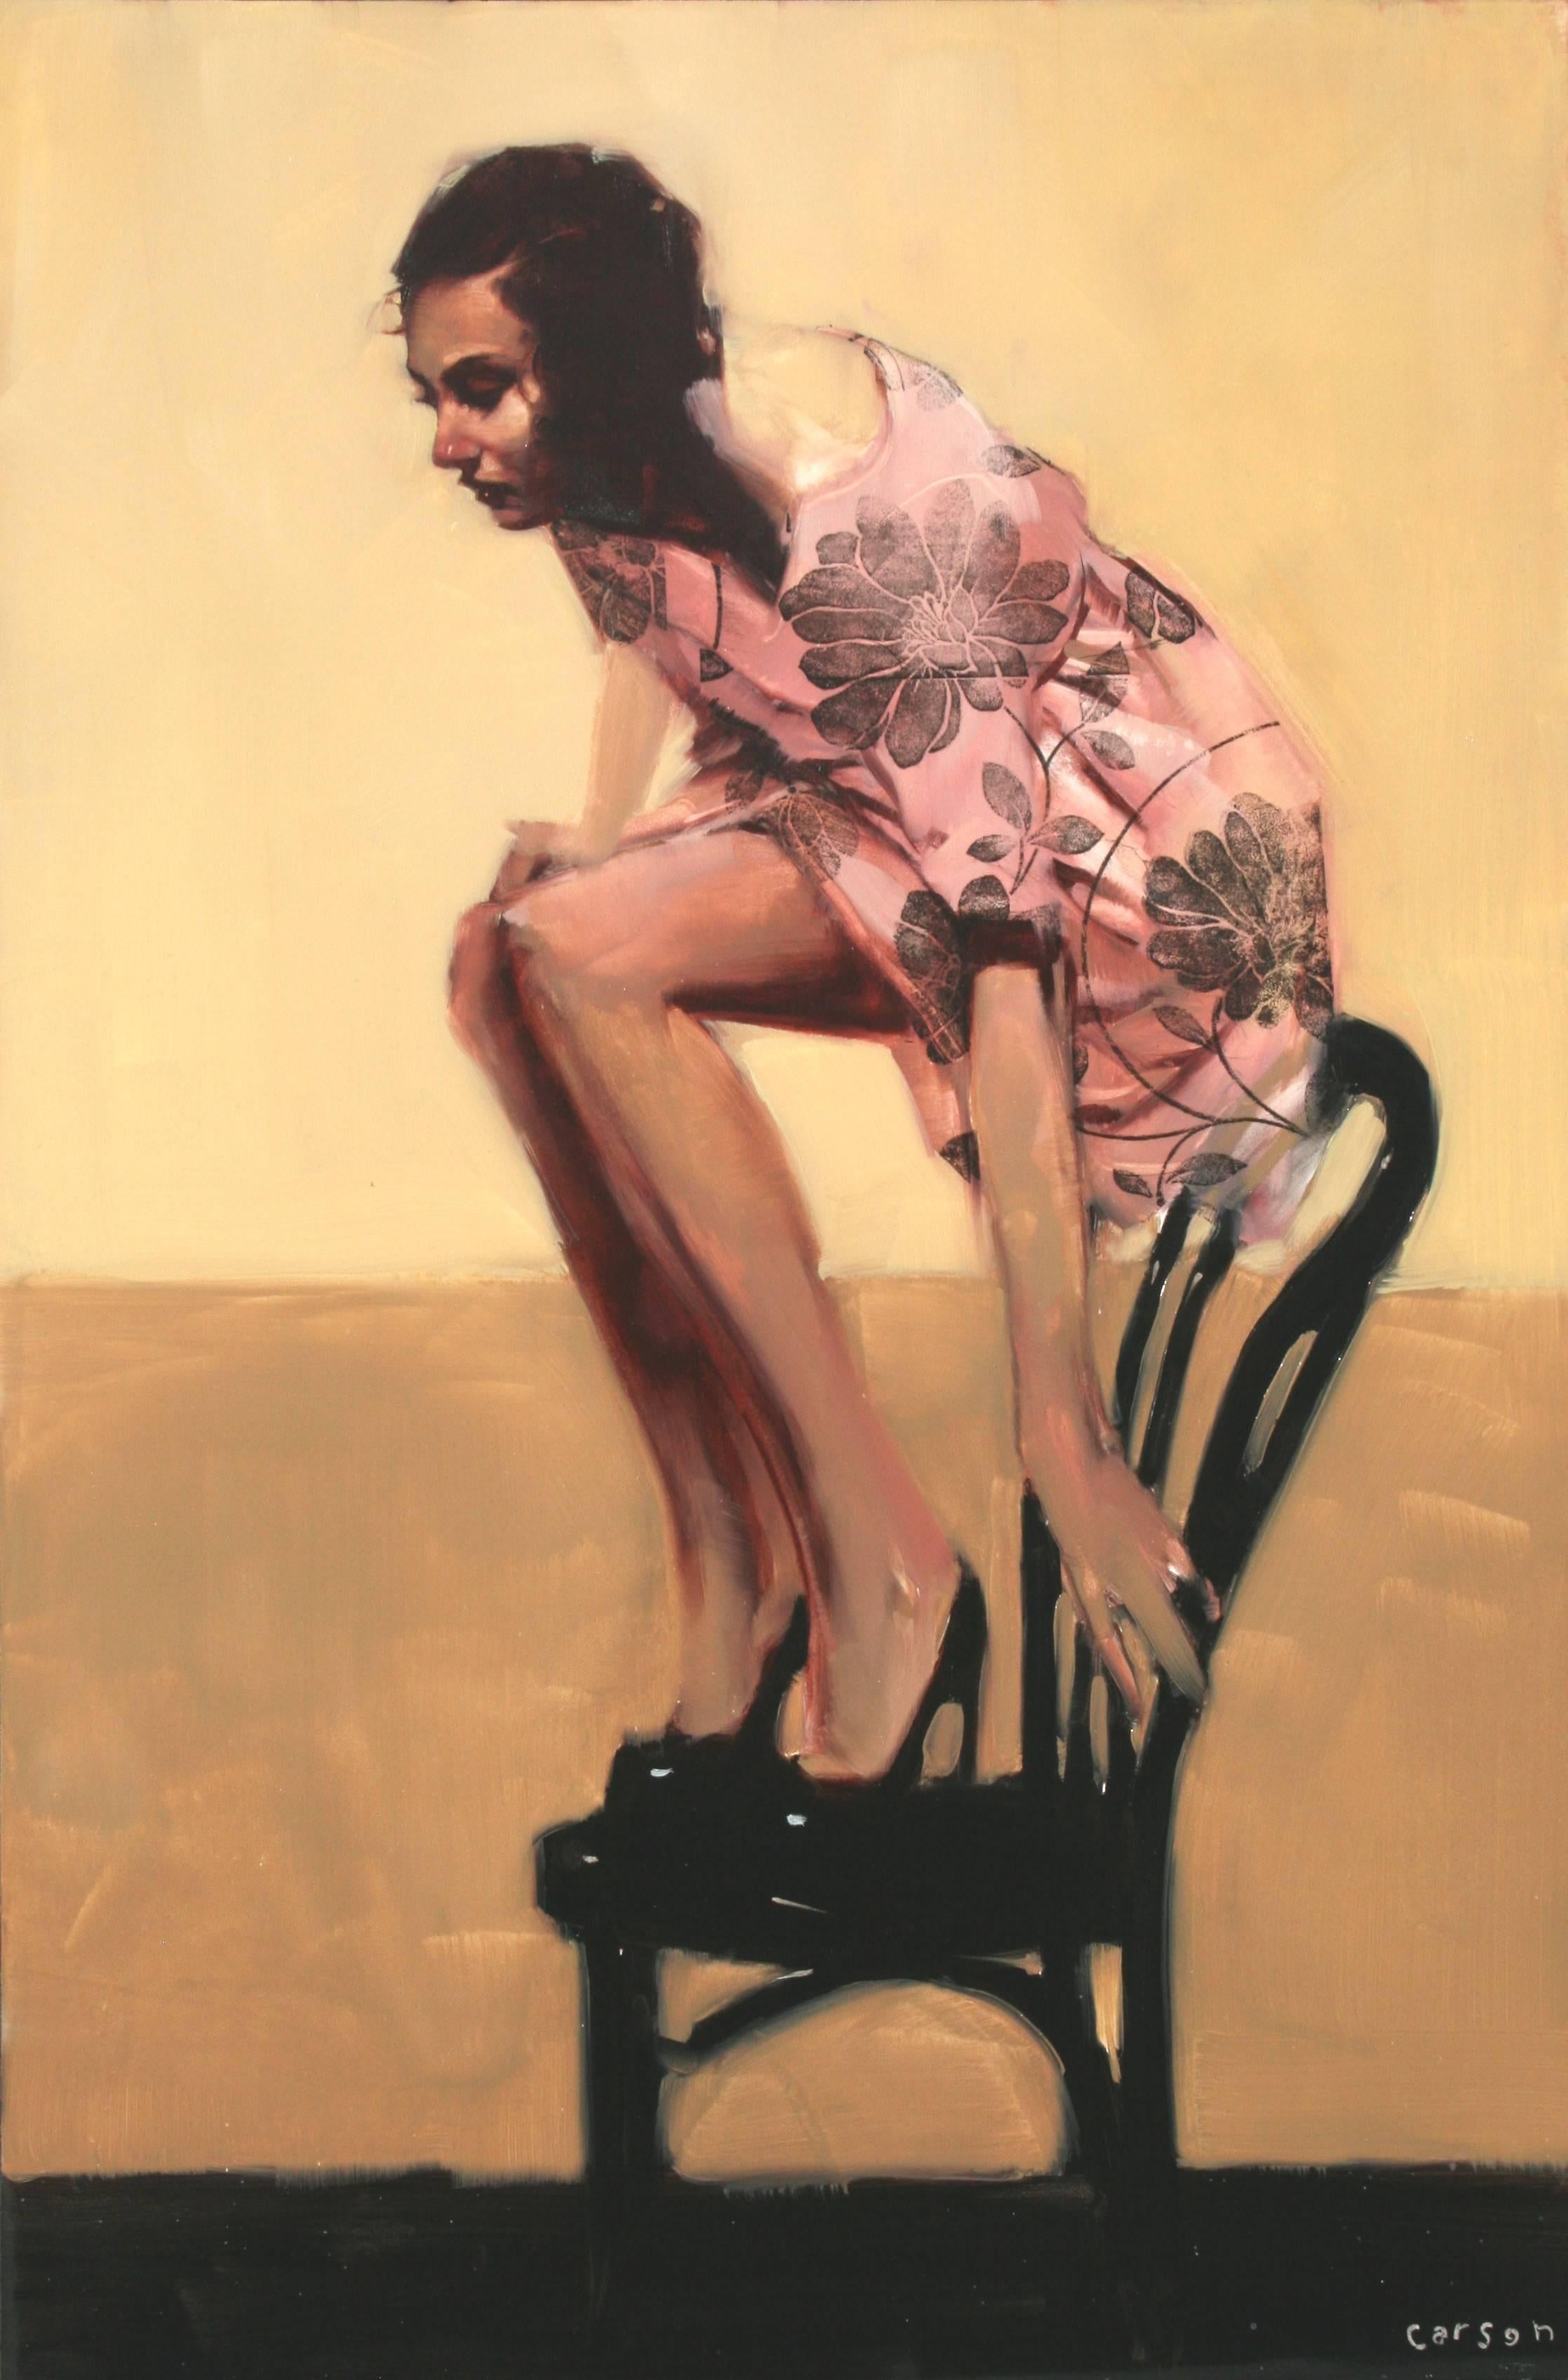 Michael Carson Figurative Painting - "Precariously Positioned"